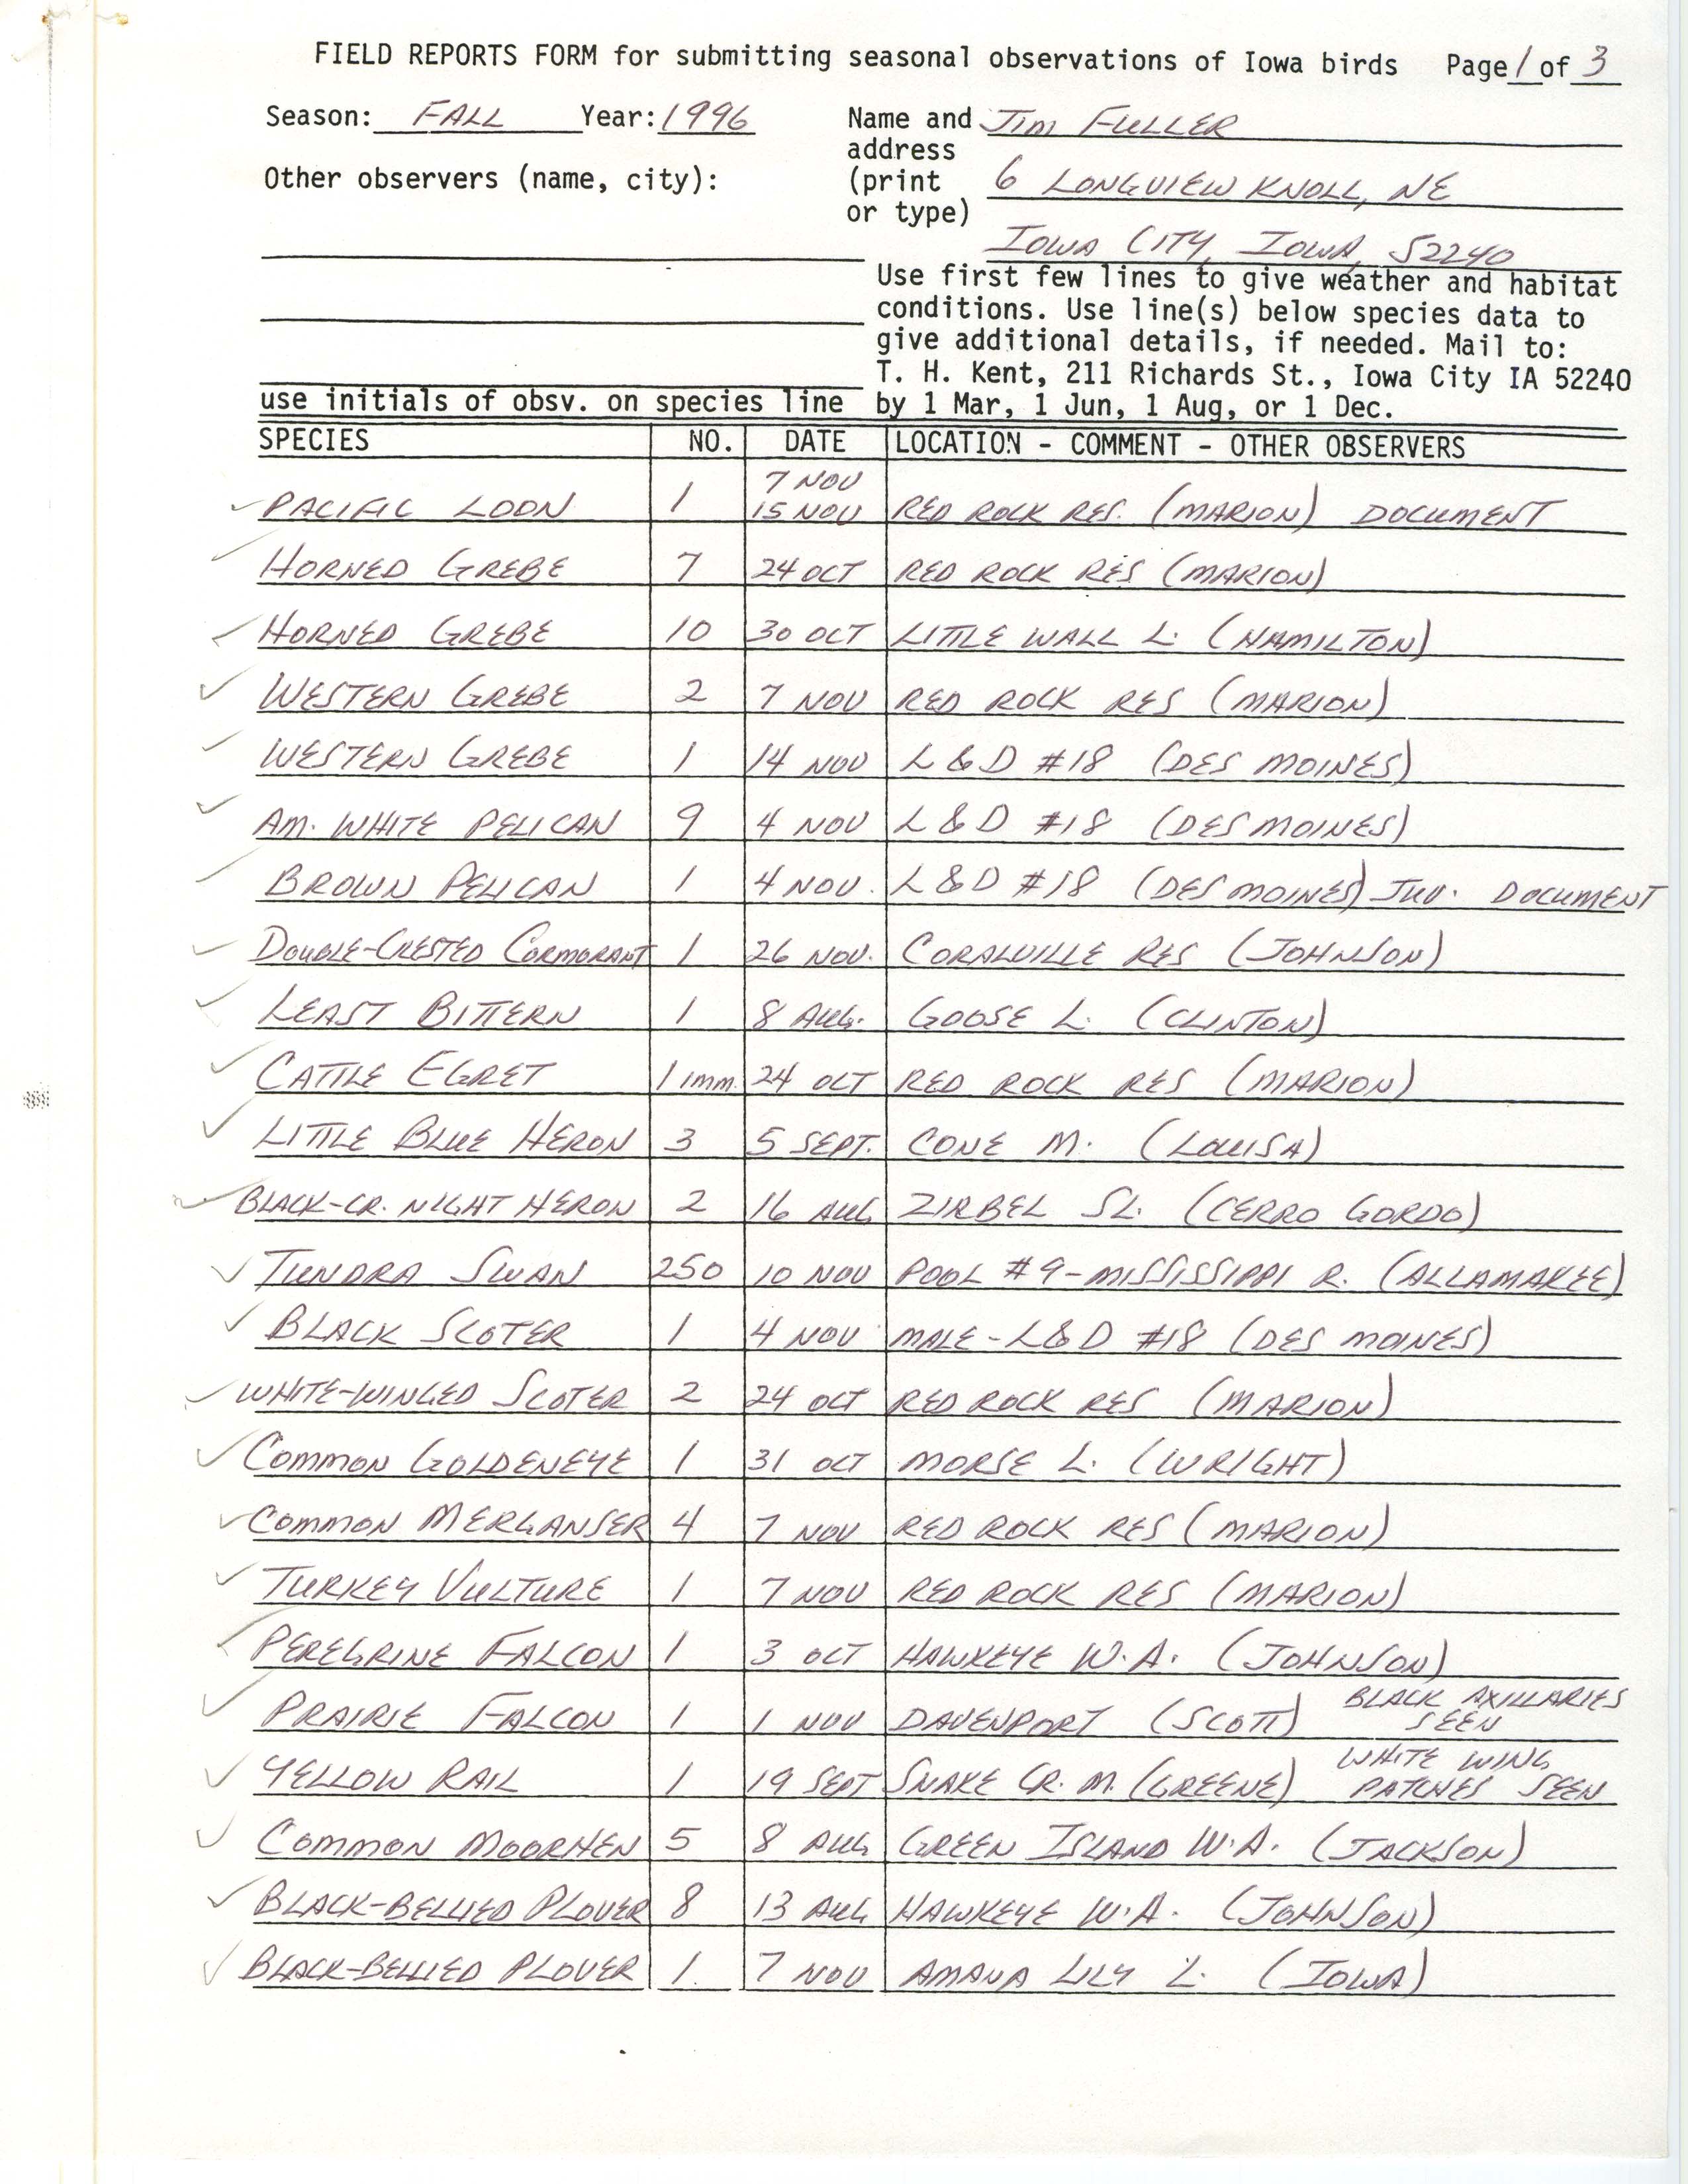 Field reports form for submitting seasonal observations of Iowa birds, James L. Fuller, fall 1996